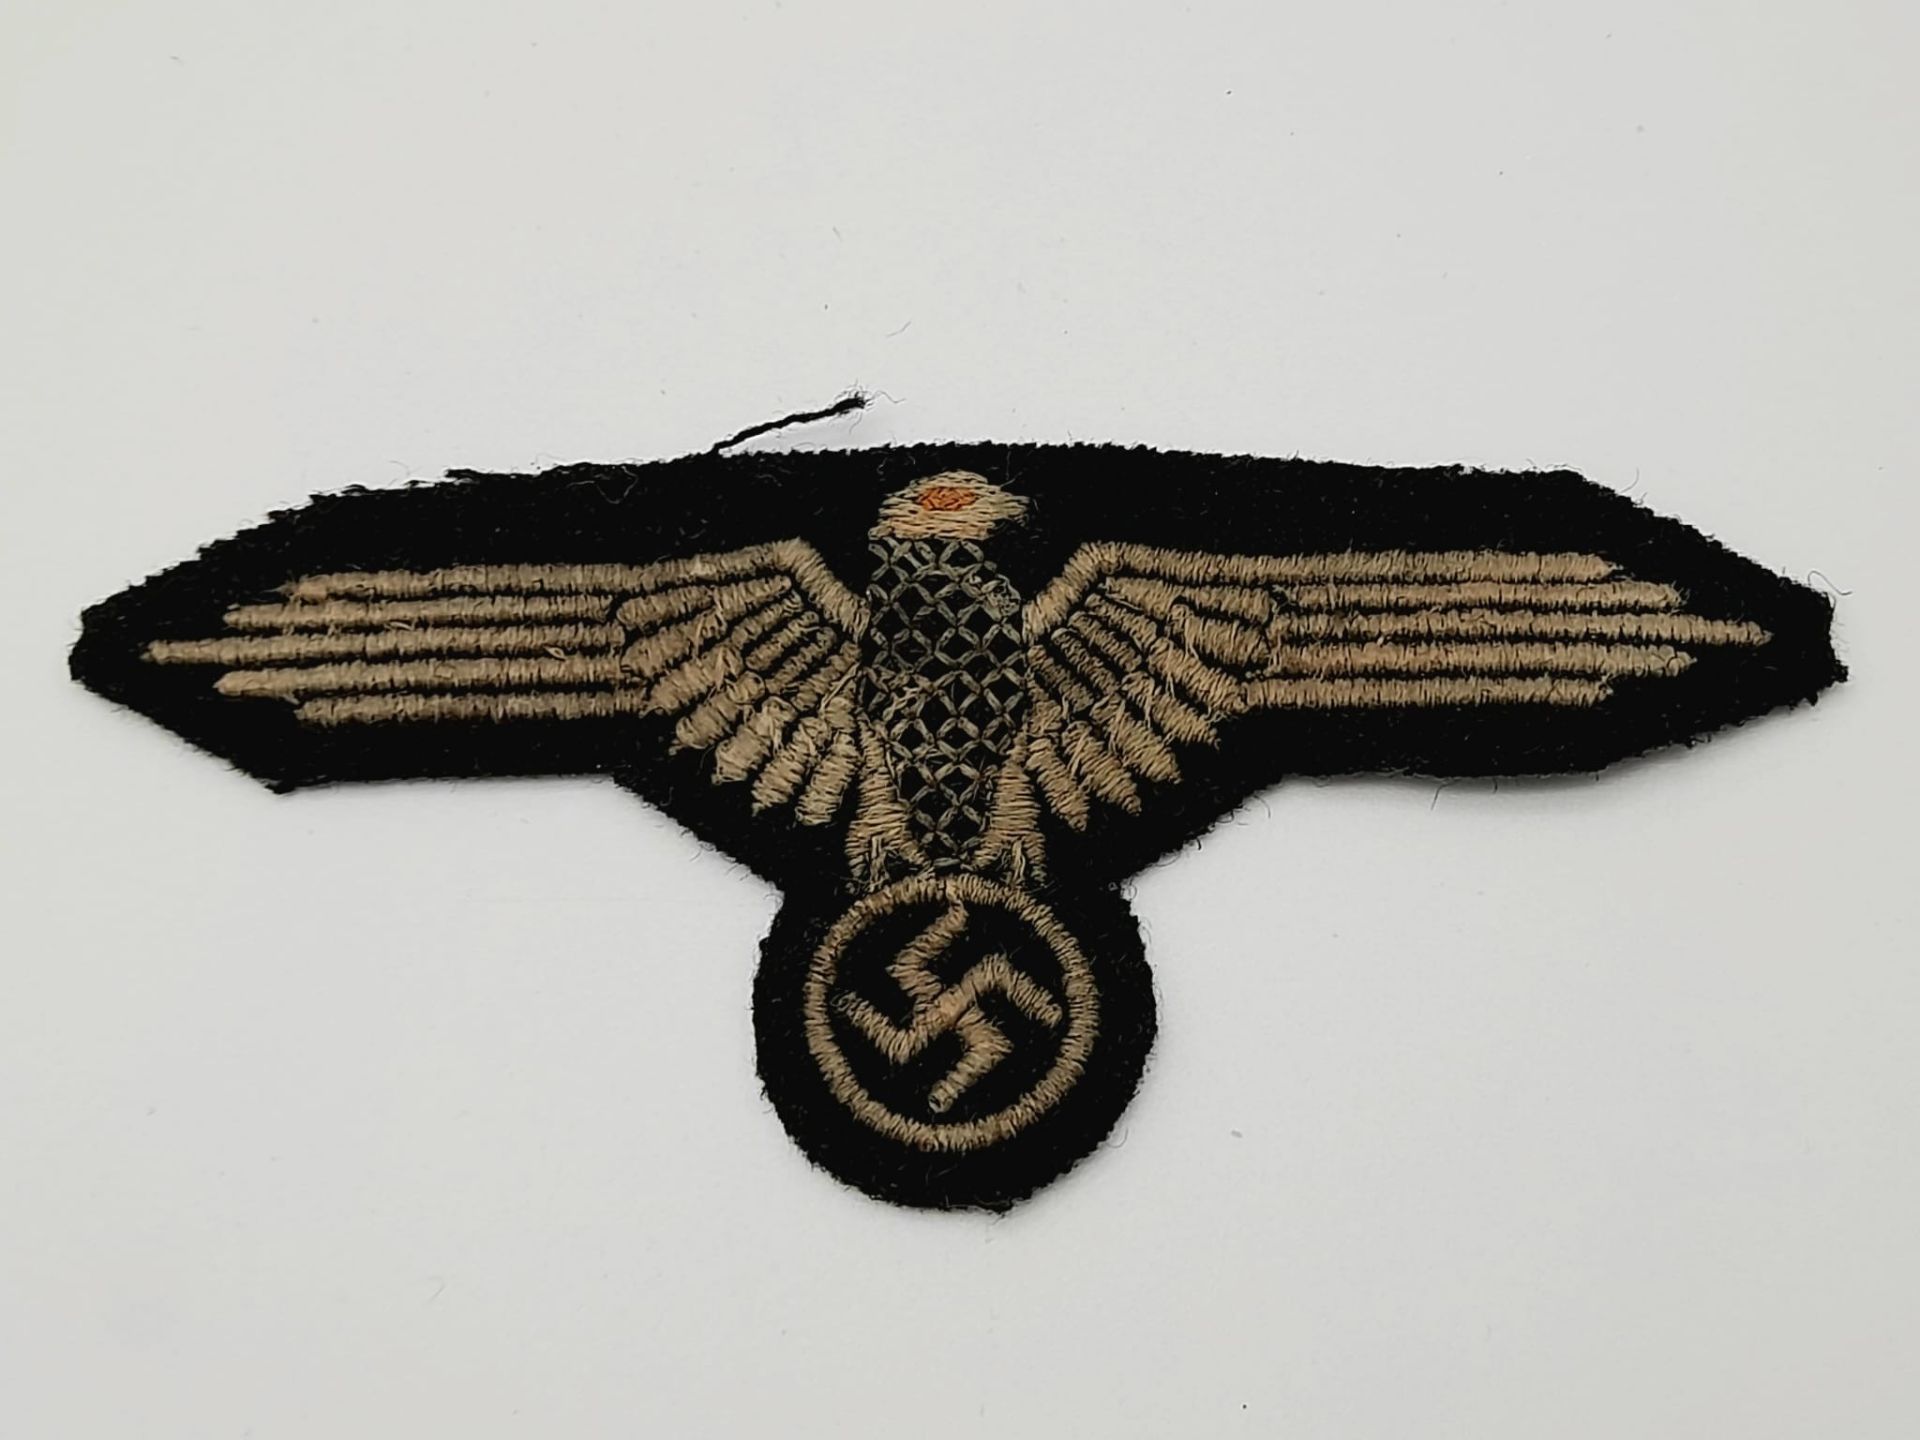 3rd Reich Waffen SS Sleeve Eagle. Passes the Black Light Test.